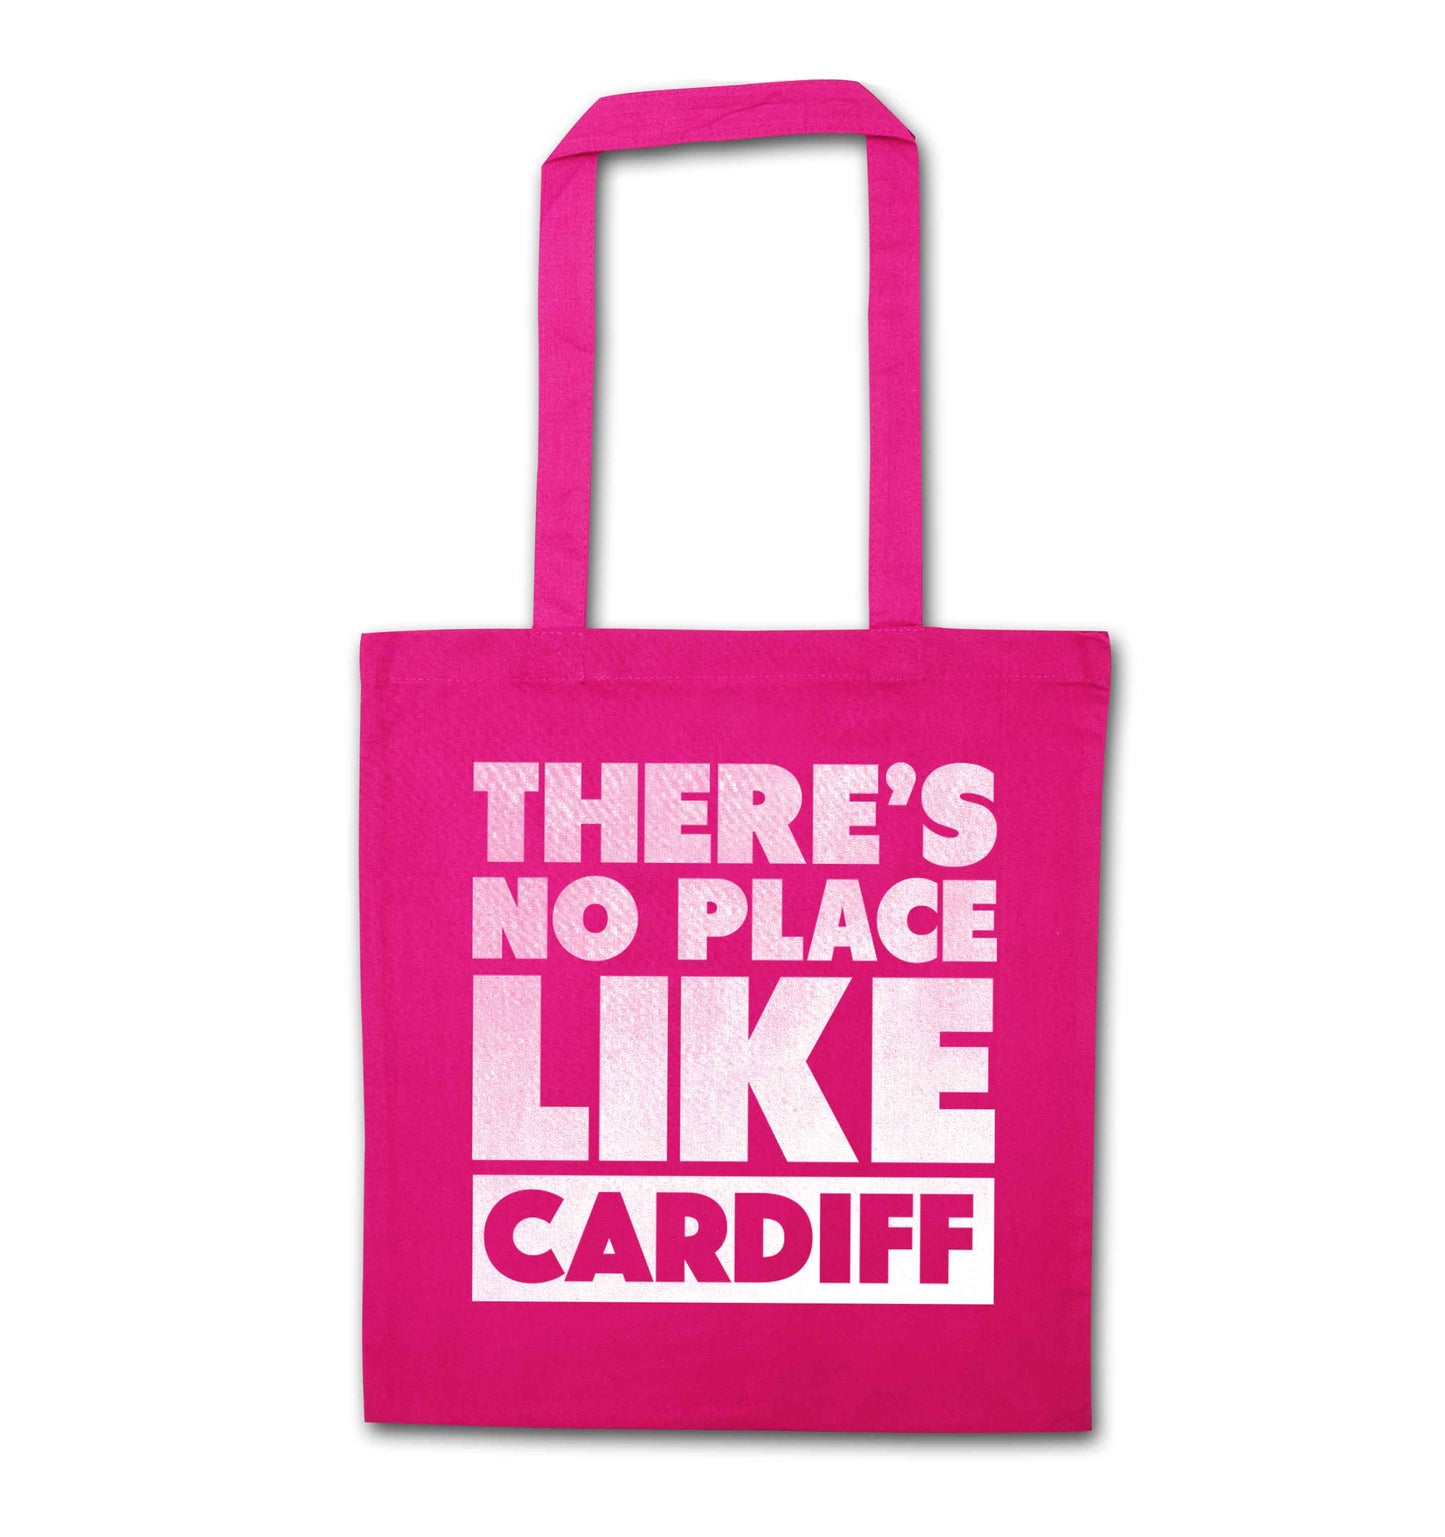 There's no place like Cardiff pink tote bag